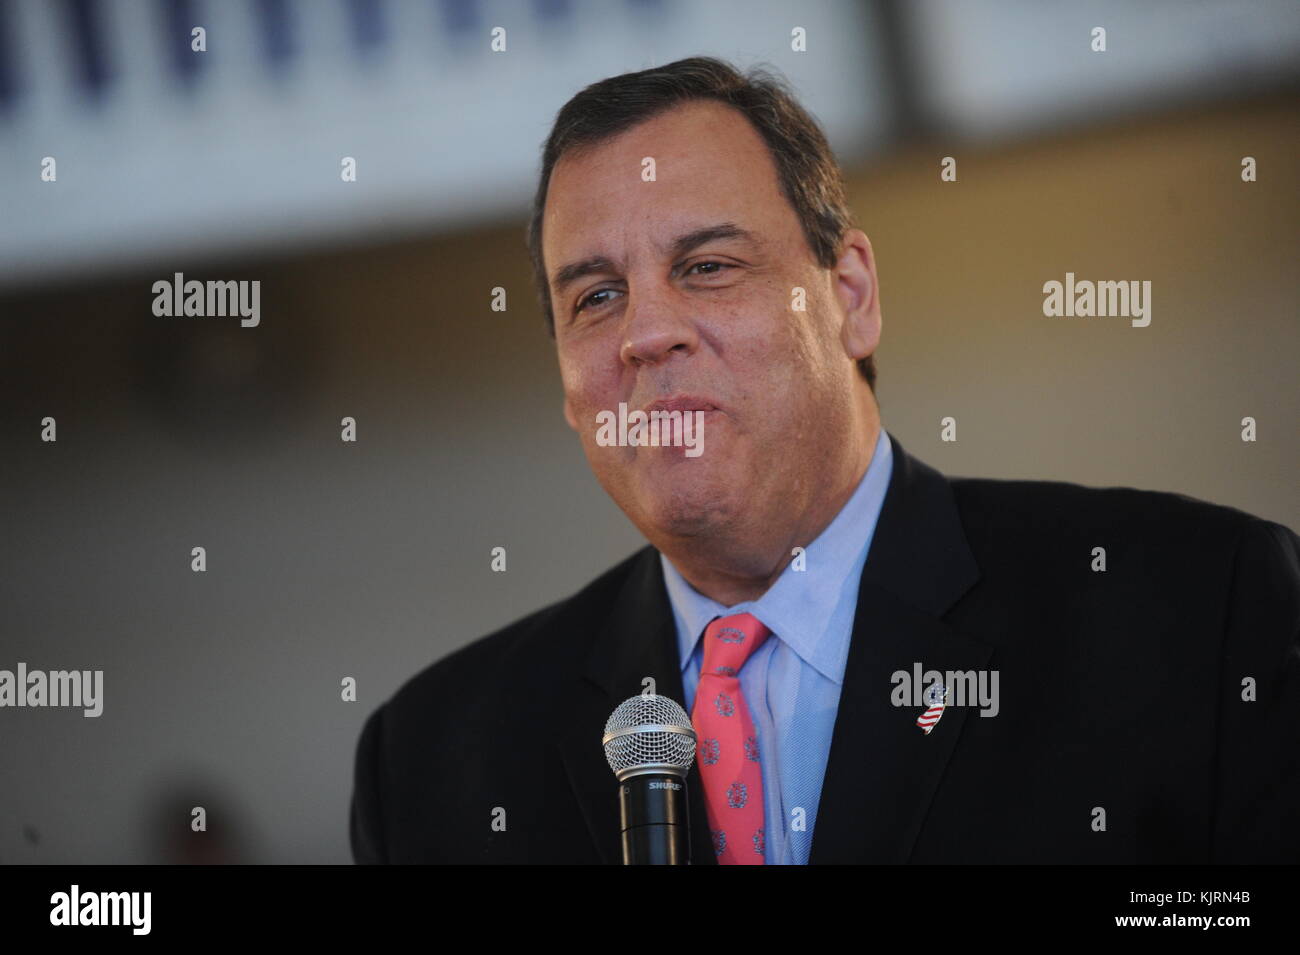 FAIR LAWN, NJ - JANUARY 21: New Jersey Governor Chris Christie holds a town-hall meeting at the Fair Lawn Recreation Center. on March 3, 2014 in Fair Lawn, New Jersey  People:  New Jersey Governor Chris Christie Stock Photo